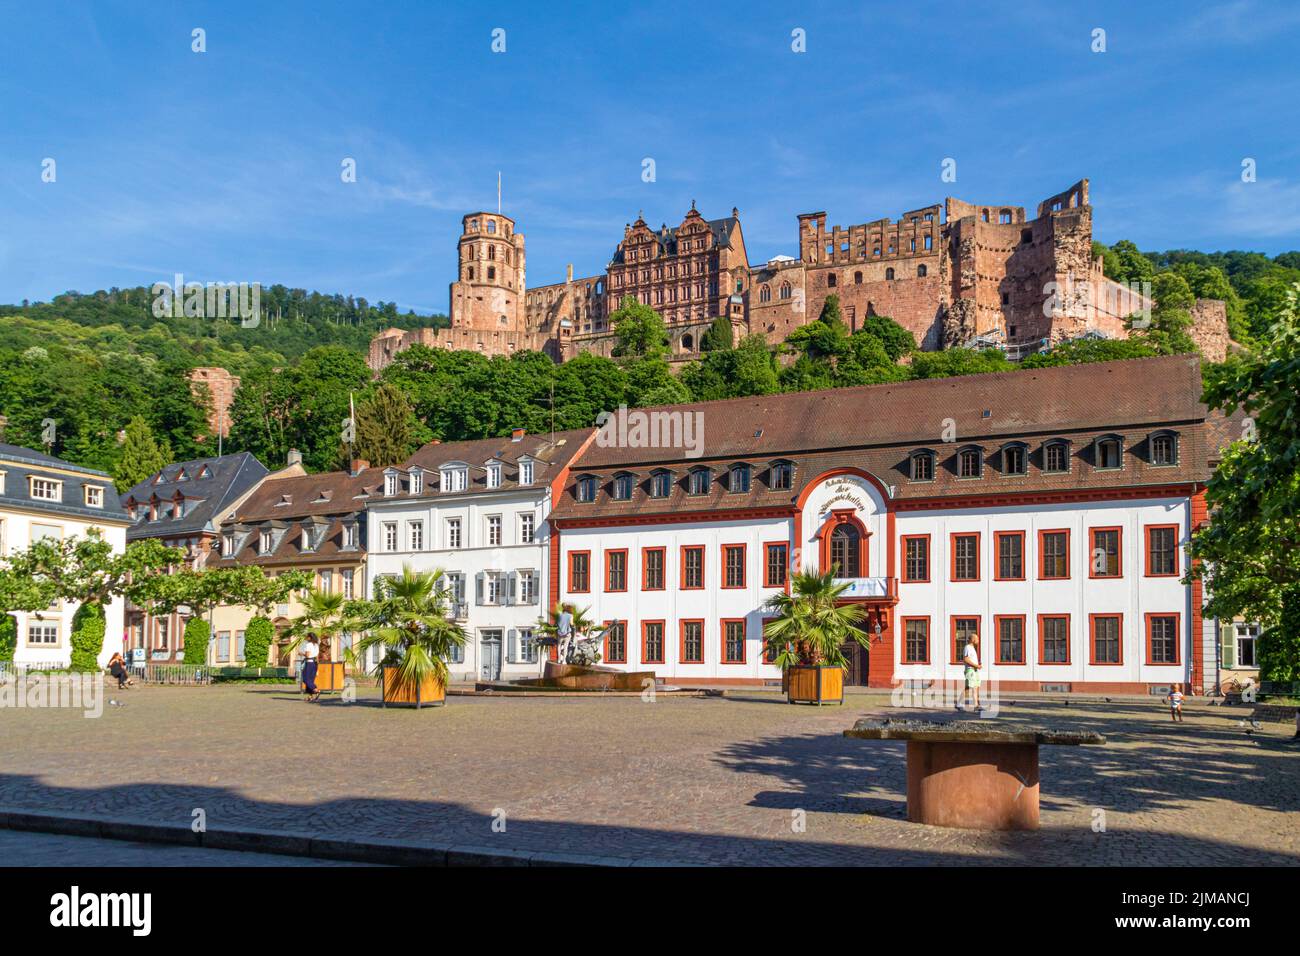 Heidelberg, Germany: June, 2. 2022: Karlsplatz (trans.: Carls Square) in Heidelberg, Germany with famous castle in background. A popular photo subject Stock Photo